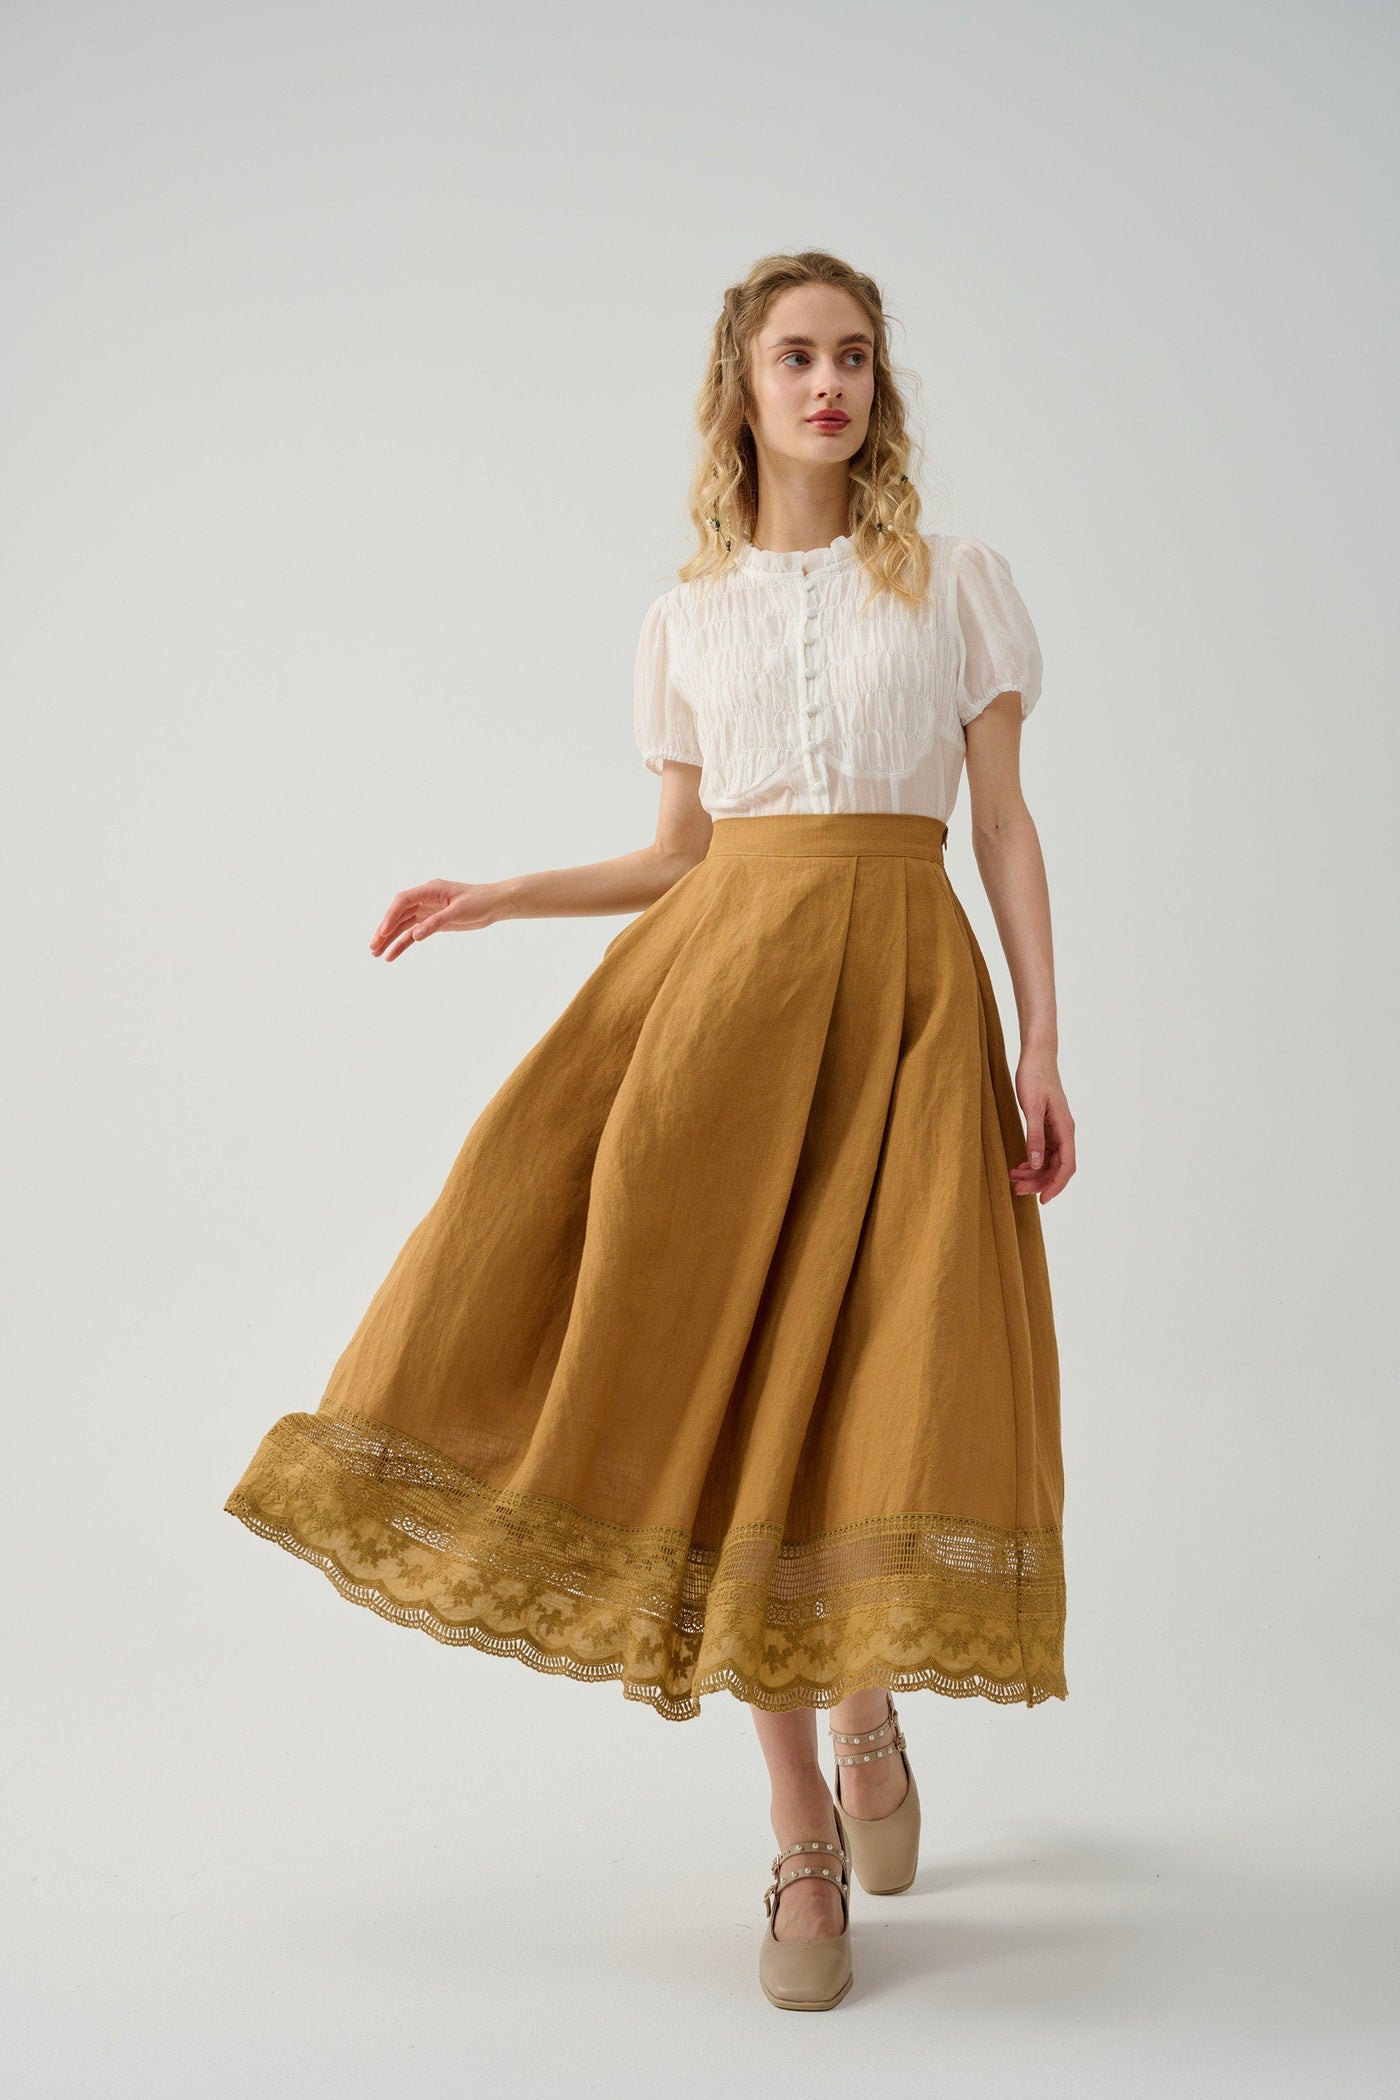 Nellie 21 |Linen skirt with Lace